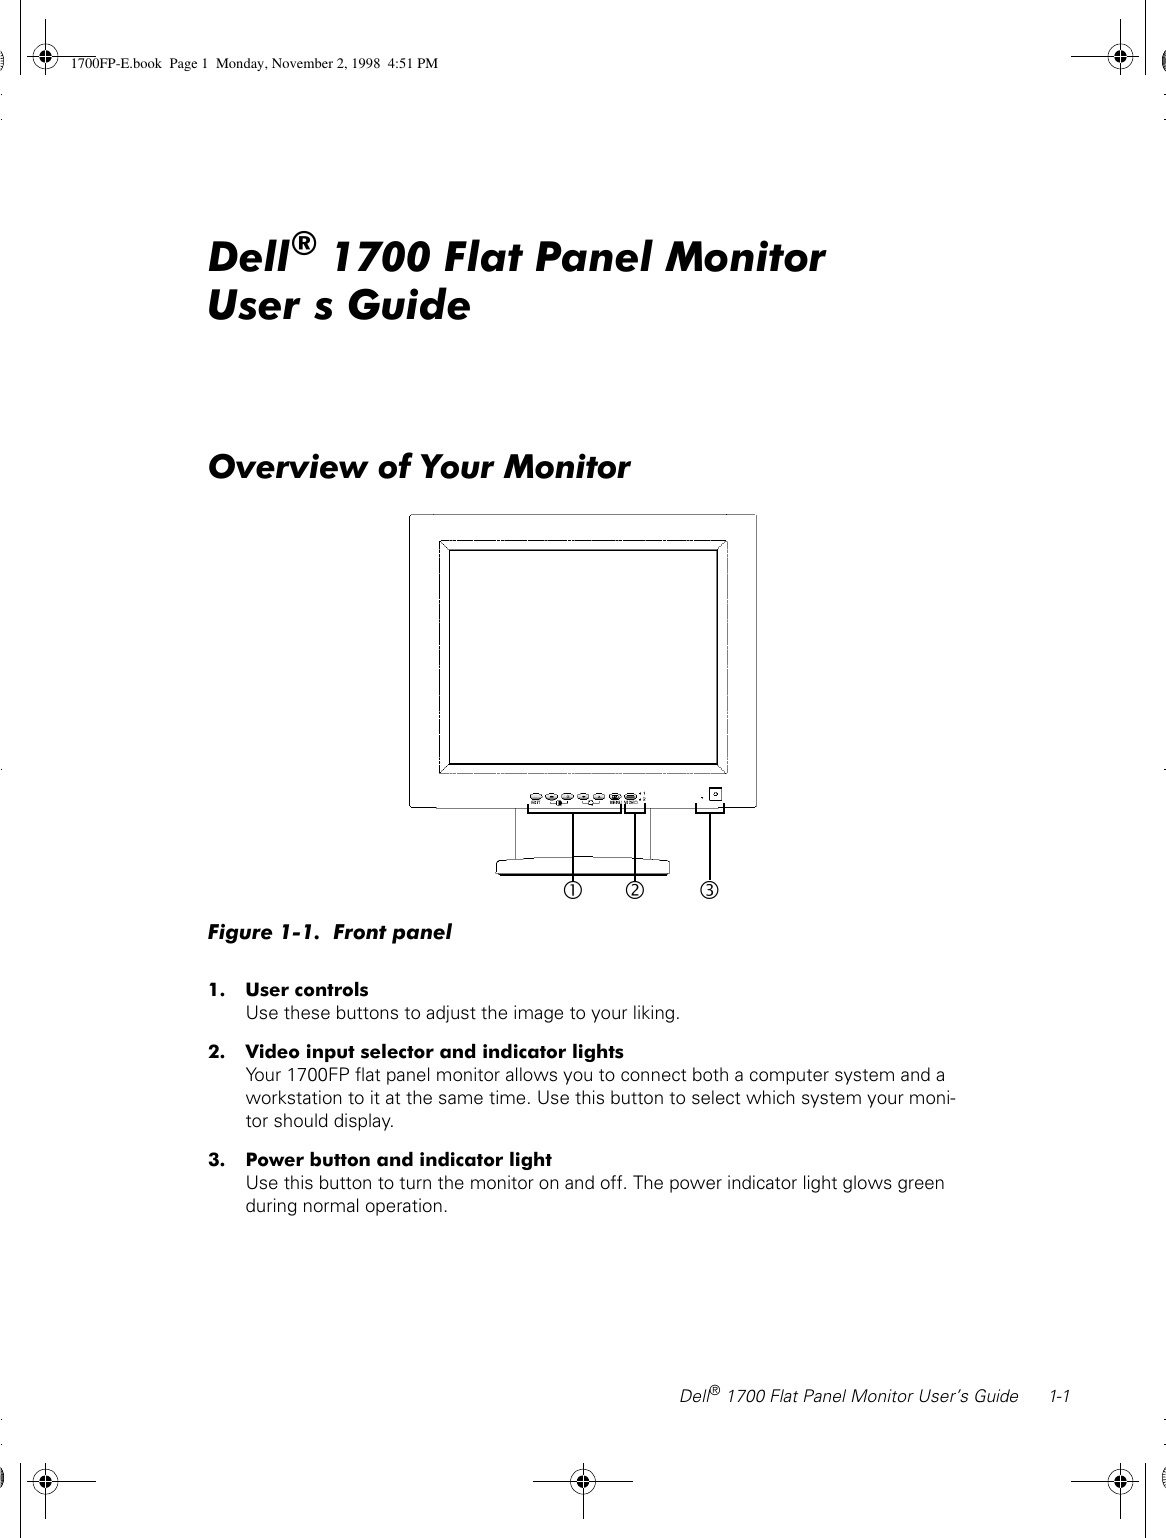 Dell® 1700 Flat Panel Monitor User’s Guide 1-1Dell® 1700 Flat Panel Monitor User’s GuideOverview of Your MonitorFigure 1-1.  Front panel1. User controlsUse these buttons to adjust the image to your liking.2. Video input selector and indicator lightsYour 1700FP flat panel monitor allows you to connect both a computer system and a workstation to it at the same time. Use this button to select which system your moni-tor should display.3. Power button and indicator lightUse this button to turn the monitor on and off. The power indicator light glows green during normal operation.•‚ƒ1700FP-E.book  Page 1  Monday, November 2, 1998  4:51 PM